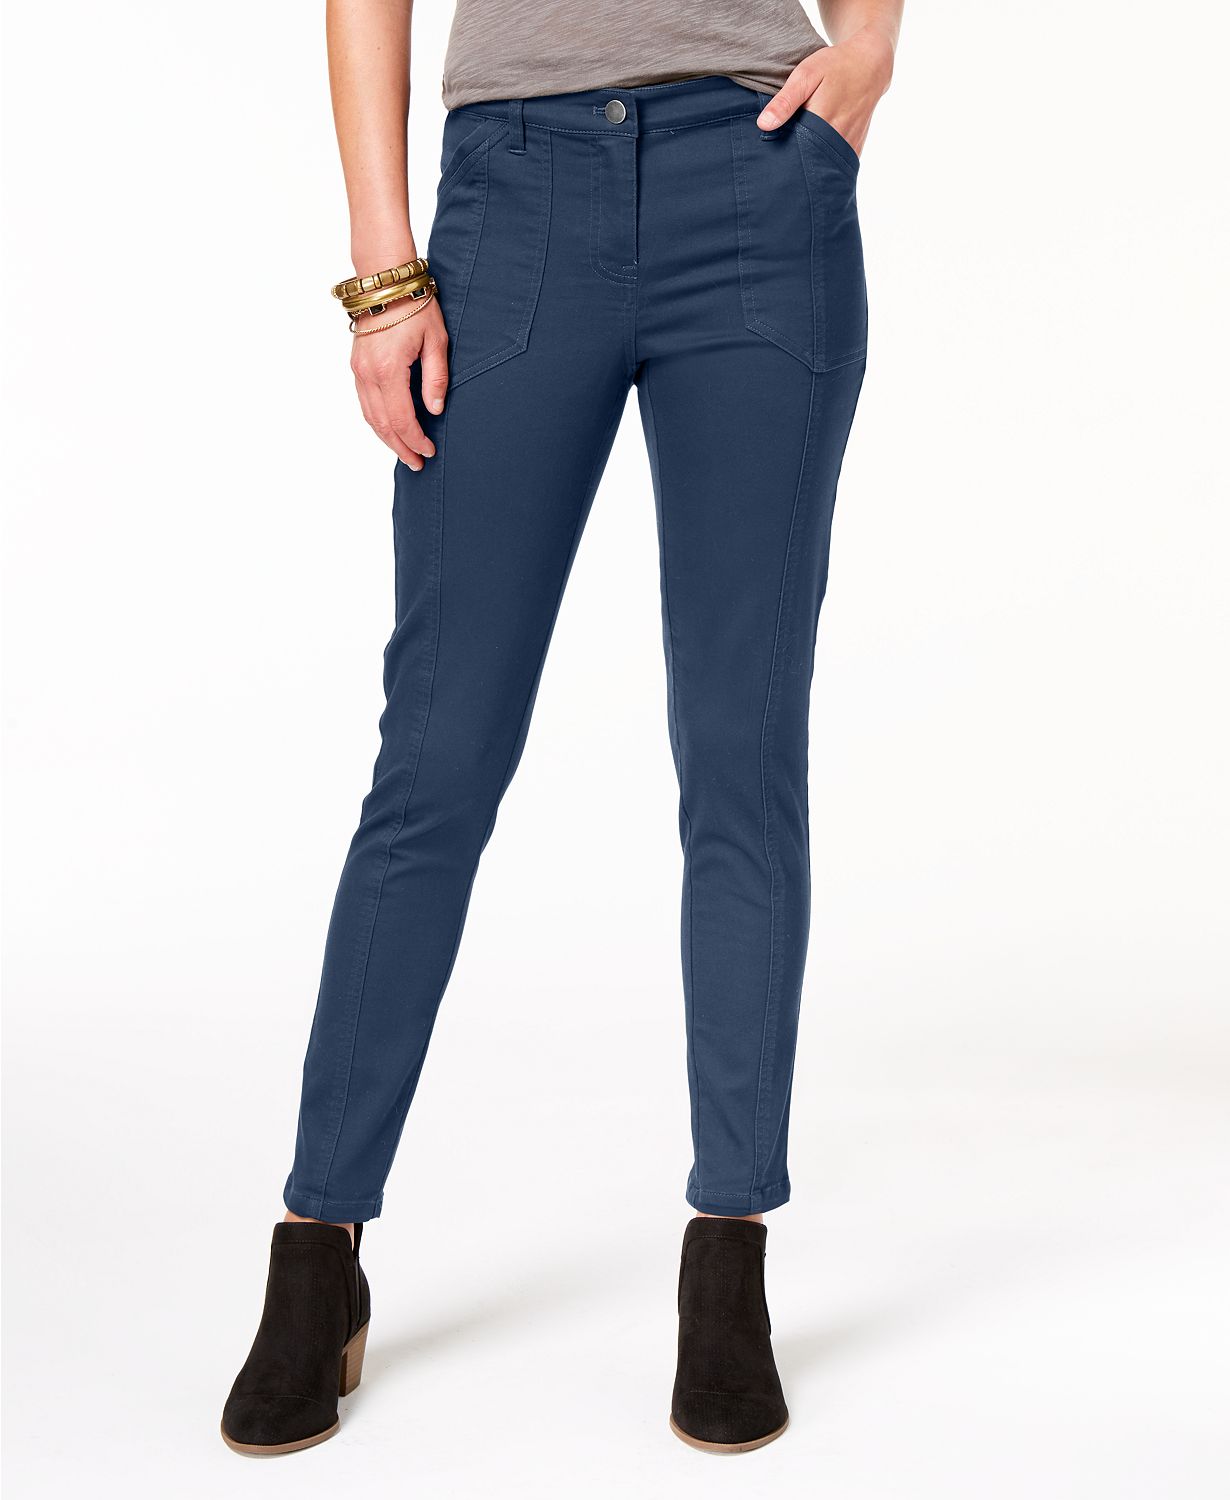 Style & Co Bandit Skinny Ankle Jeans Blue 4